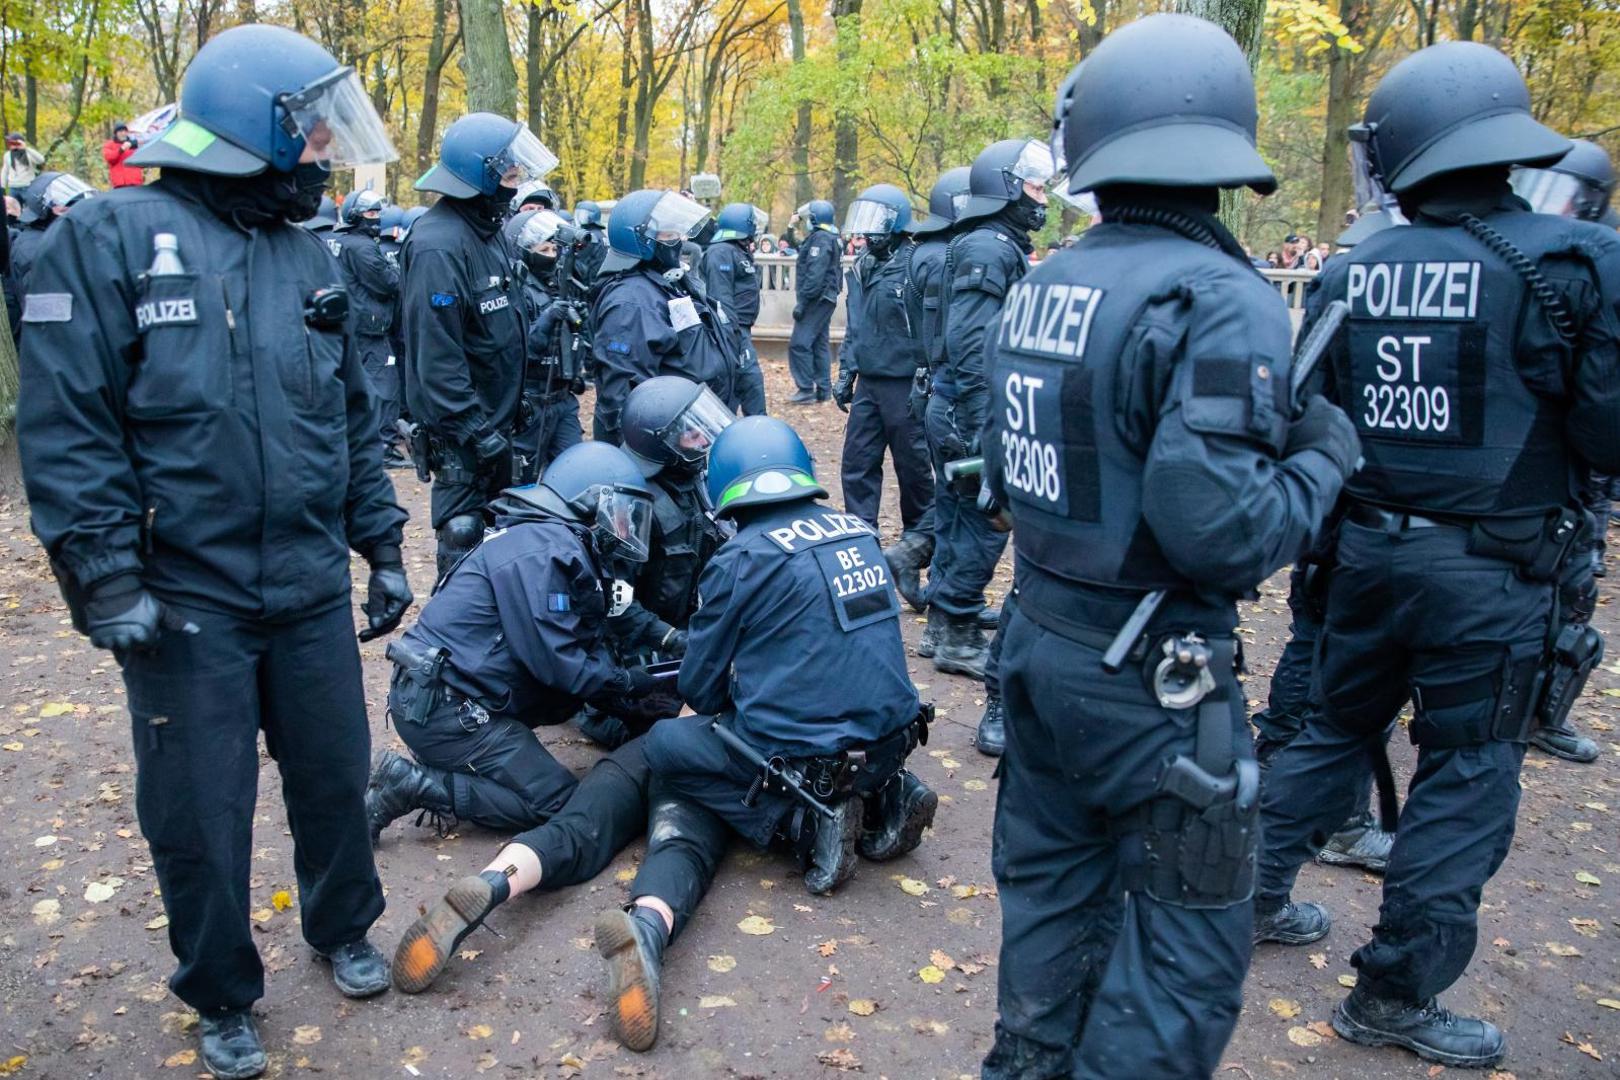 18 November 2020, Berlin: Police arrest a person during a demonstration against the Corona restrictions of the federal government near the Brandenburg Gate. The Bundestag and Bundesrat discussed changes to the infection protection law on that day. Photo: Christoph Soeder/dpa /DPA/PIXSELL